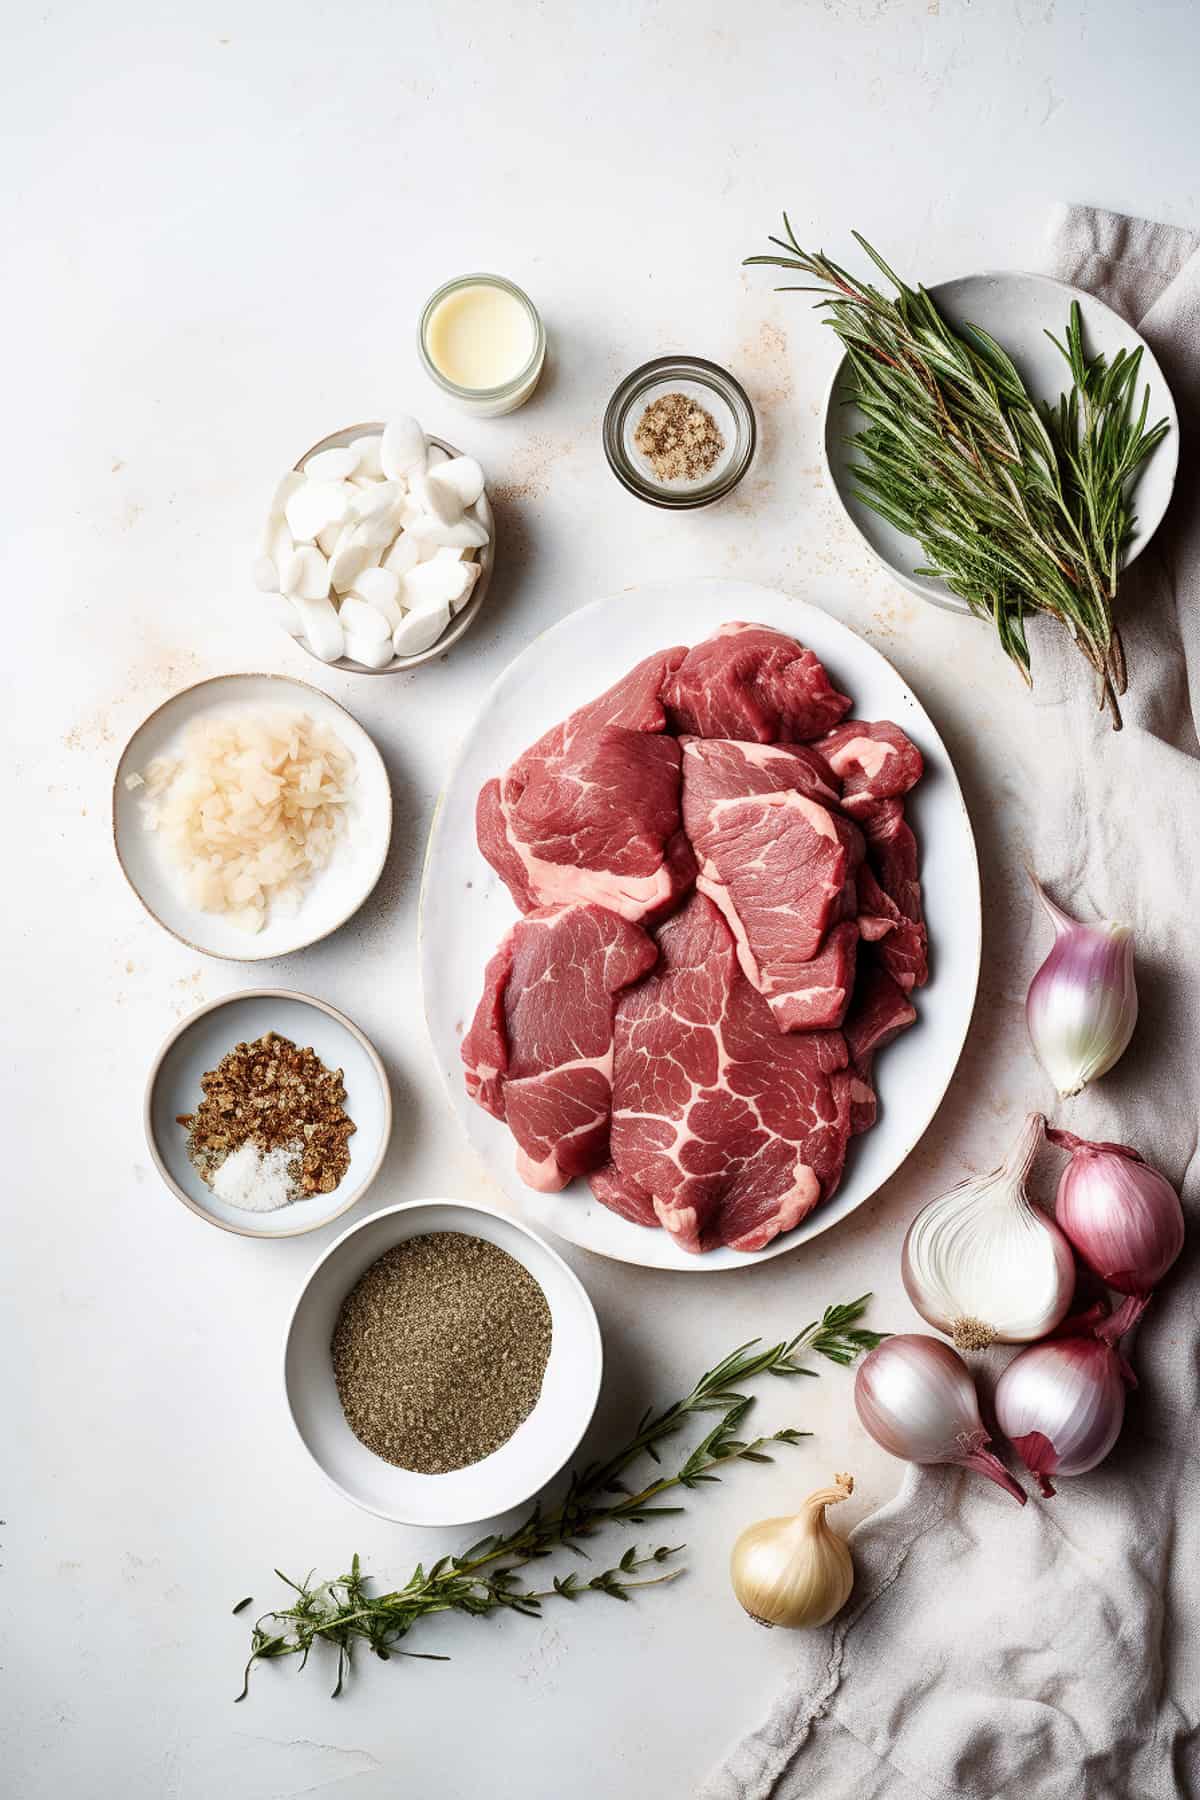 Ingredients for Rich beef stroganoff on a white plate.